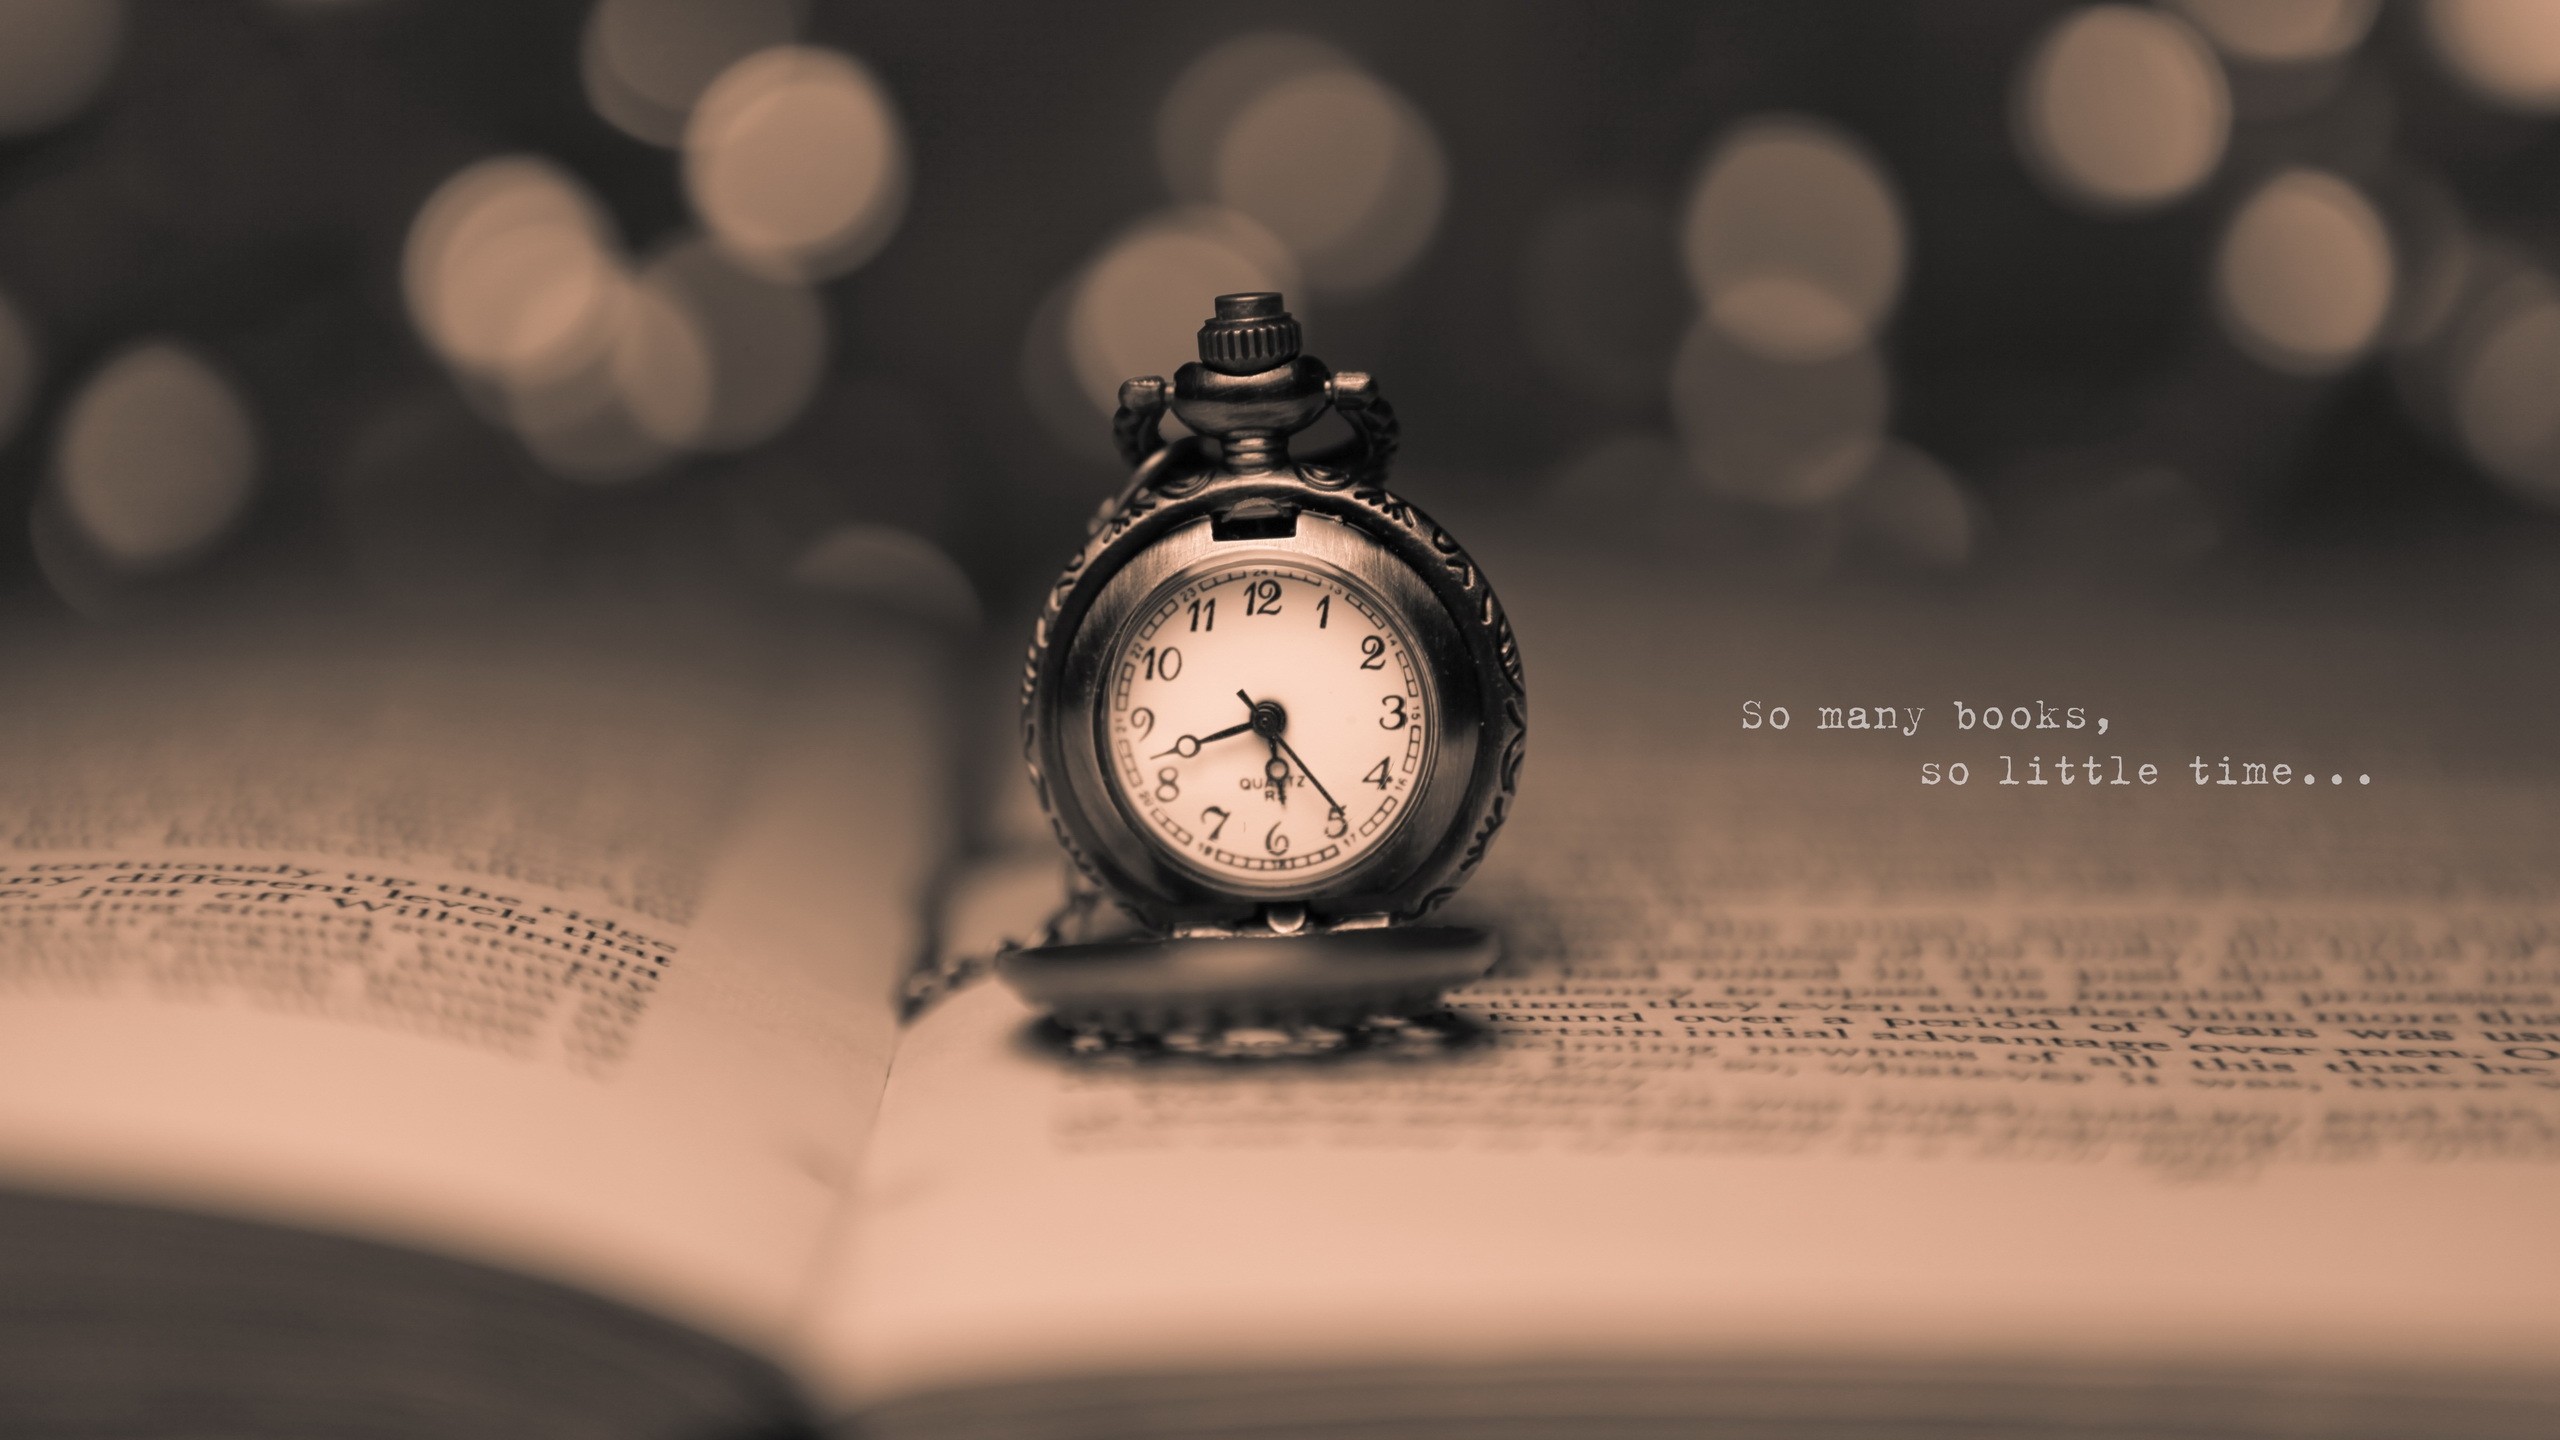 sepia, Books, Watch, Pocket Watch, Text, Quote, Depth Of Field, Bokeh, Numbers, Time, Quartz Wallpaper